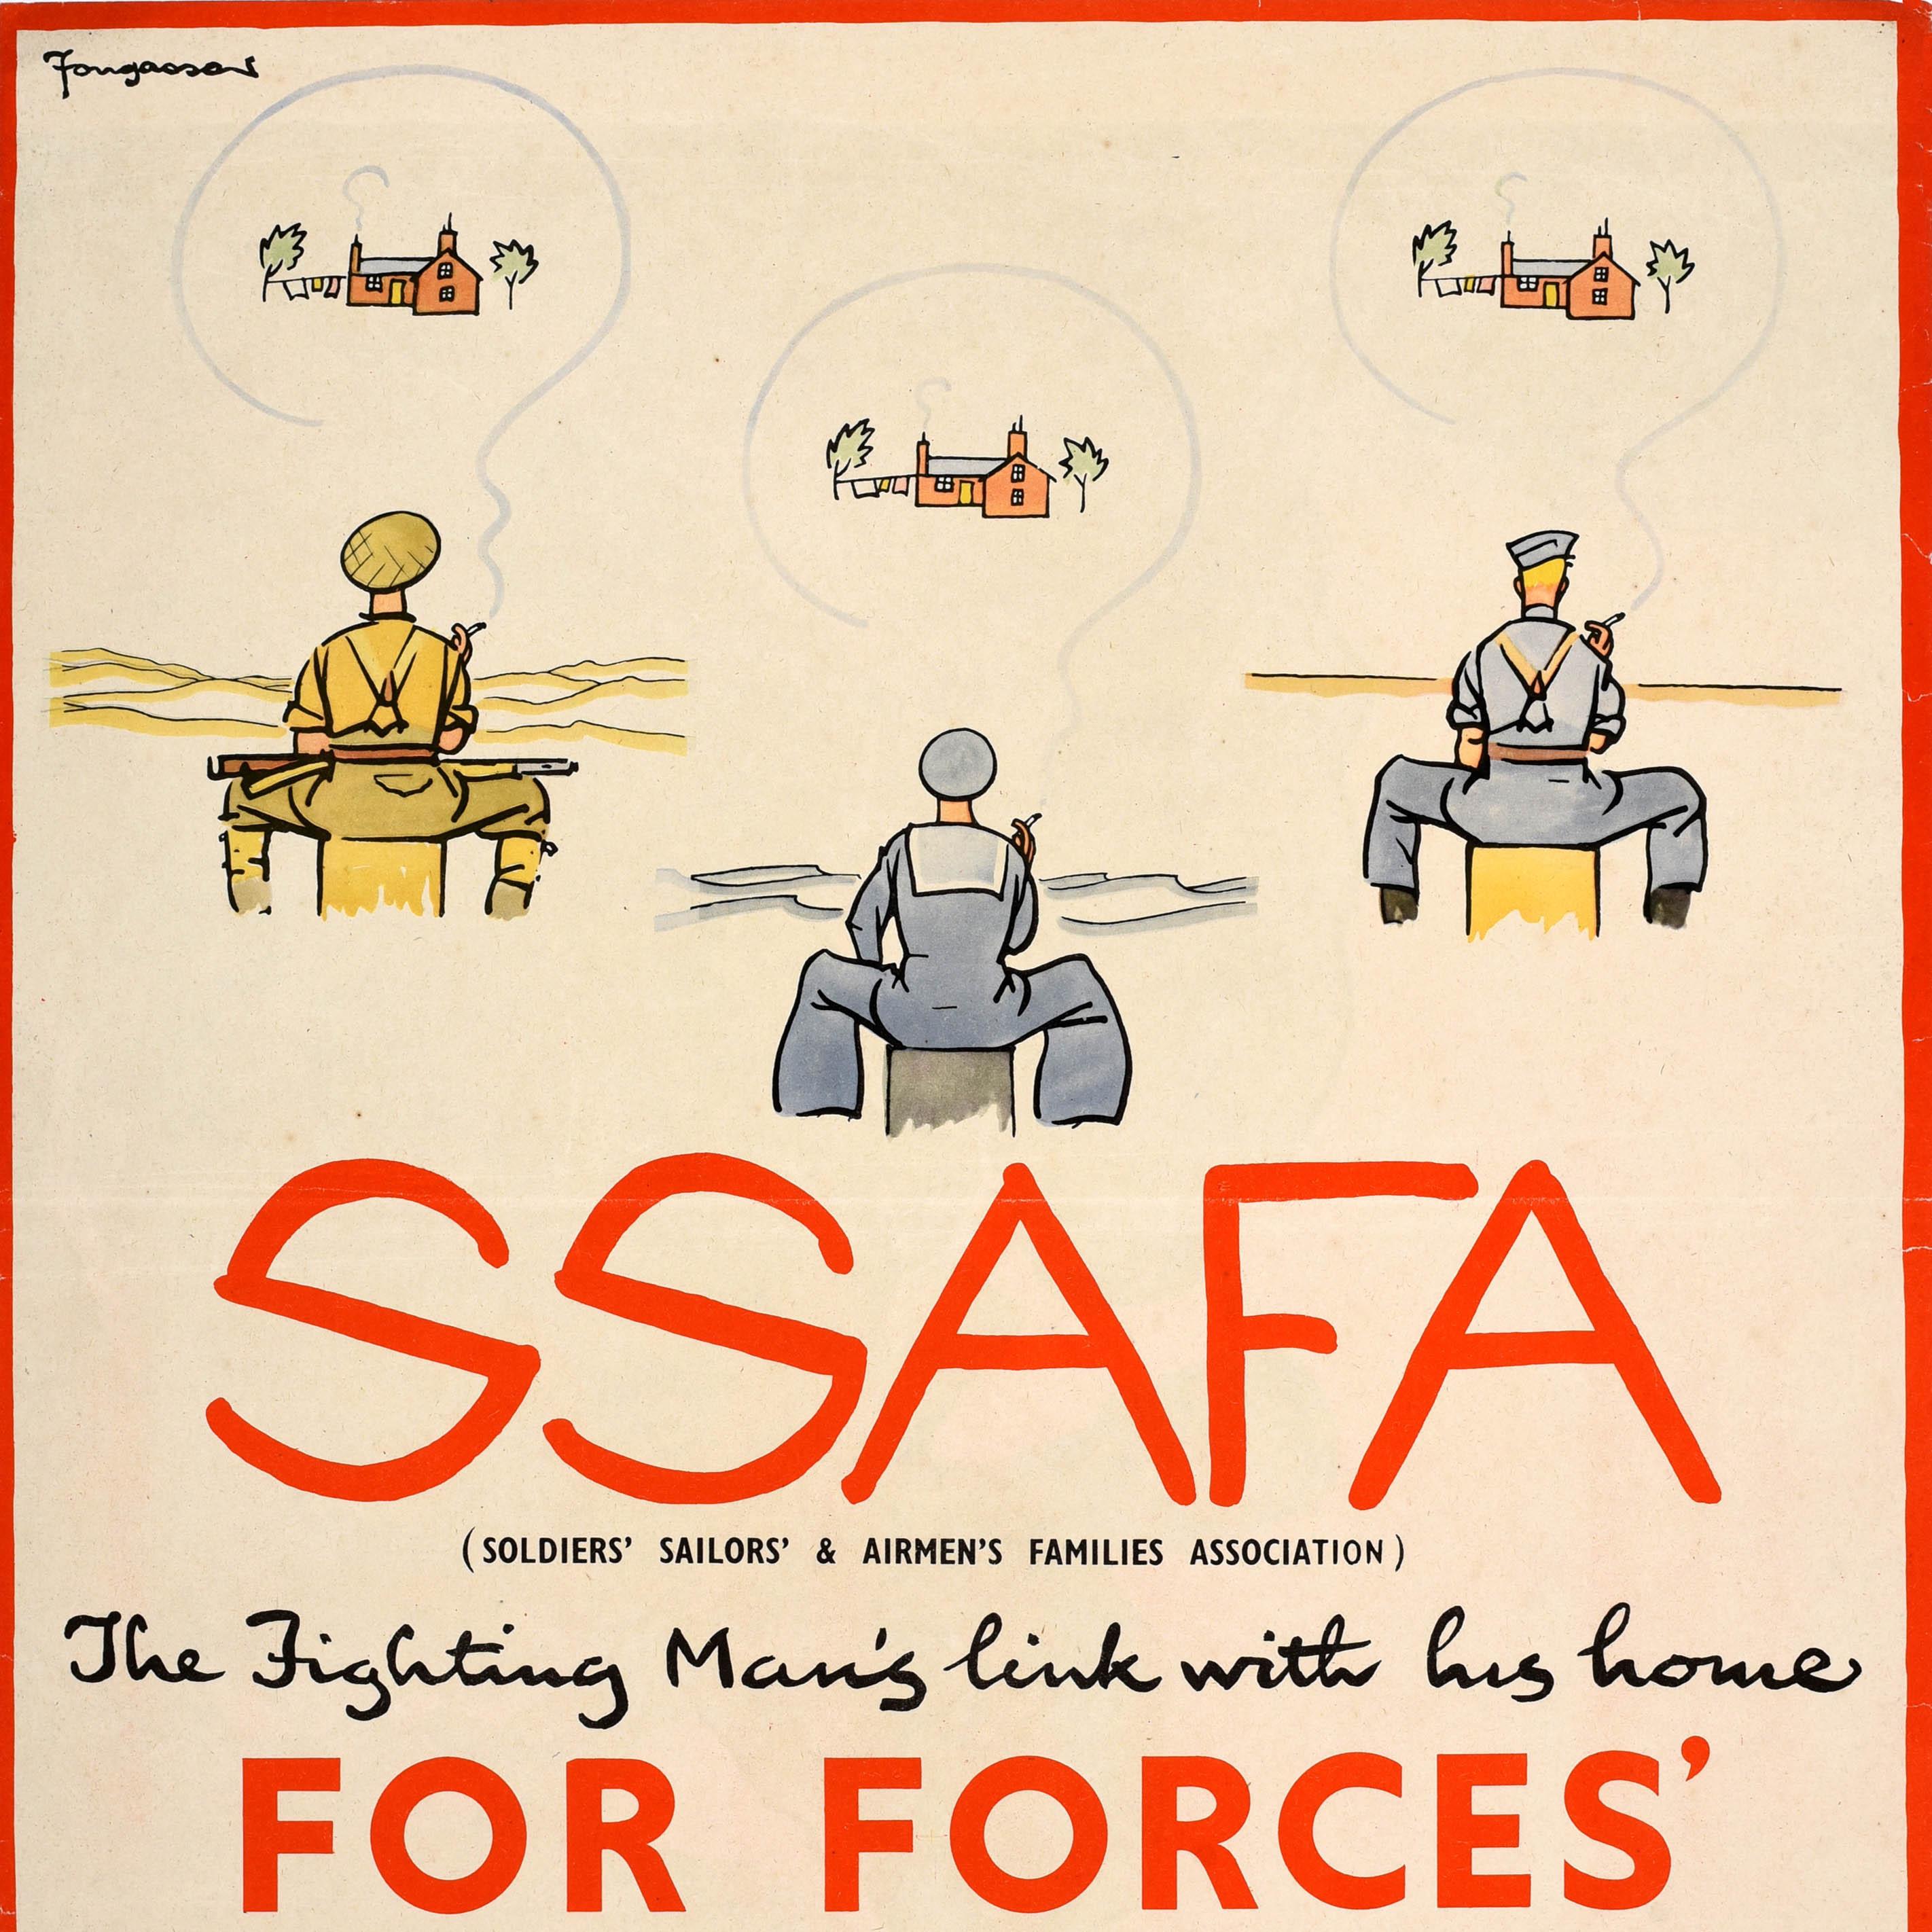 Original Vintage WWII Poster SSAFA Soldiers Sailors Airmen Families Association - Print by Fougasse (Cyril Kenneth Bird)